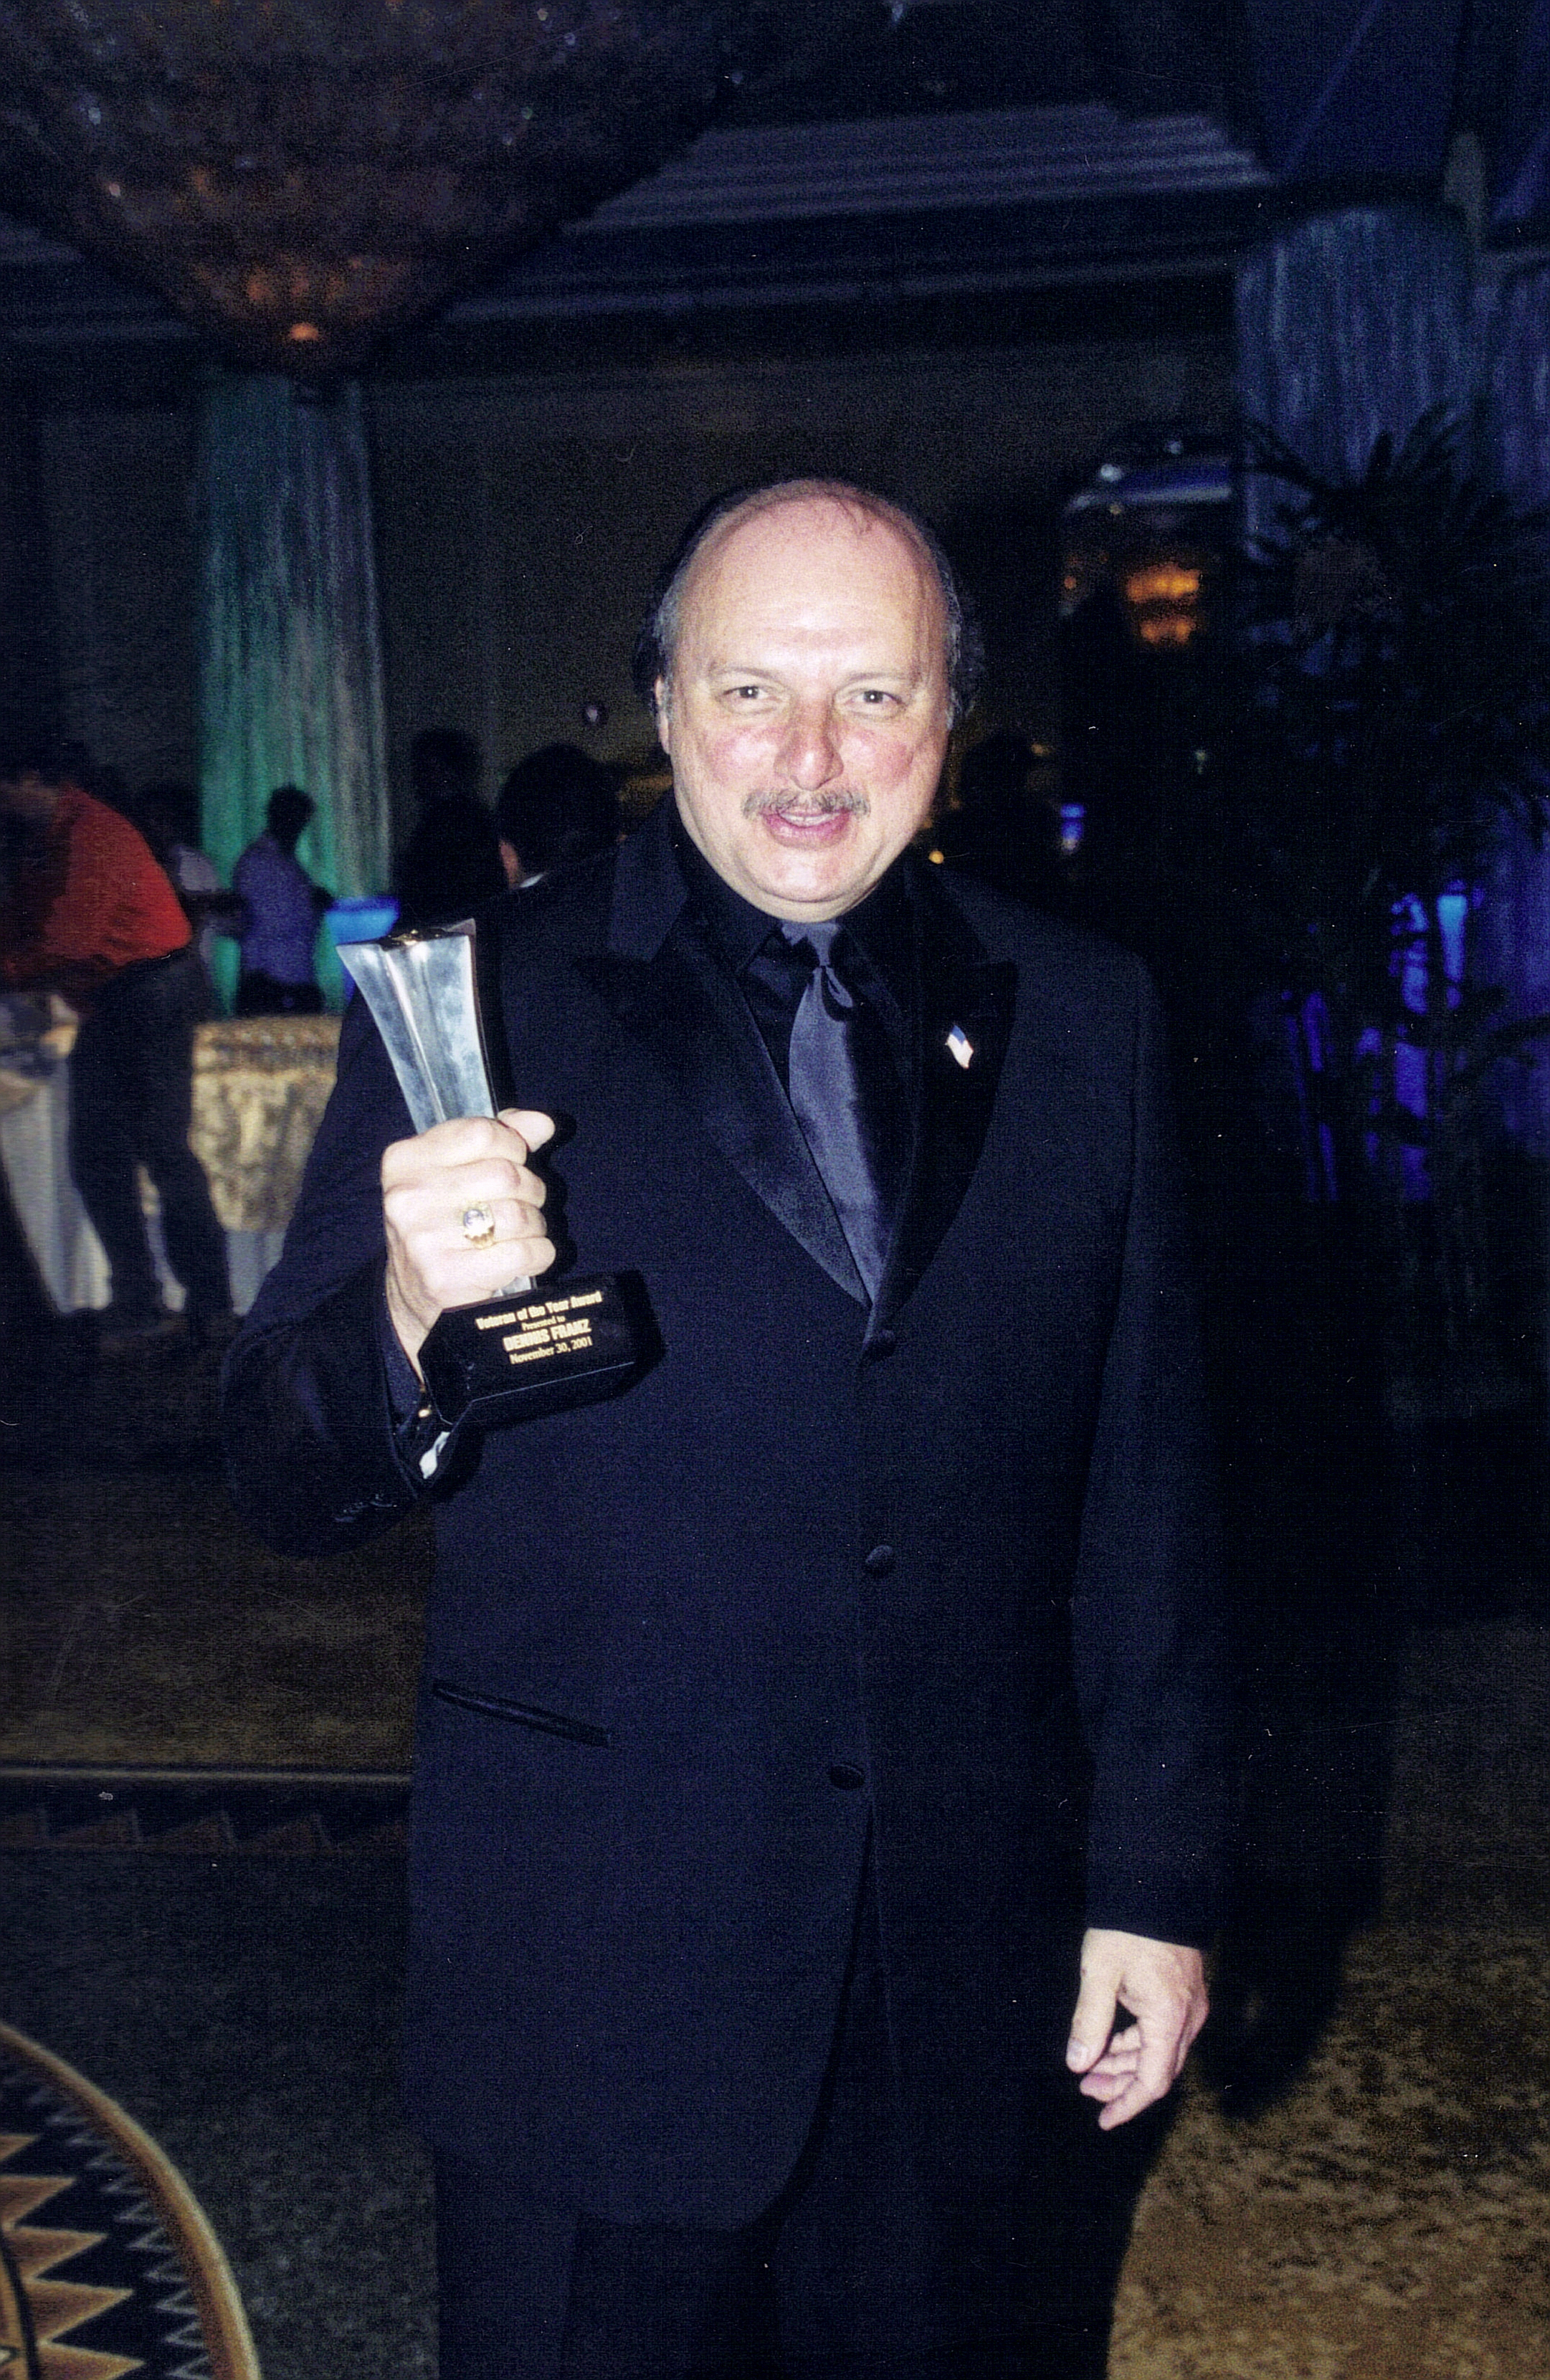 After recalling how he fell to his knees and kissed US soil upon returning from Vietnam, Dennis Franz proudly hoists his Ava Award